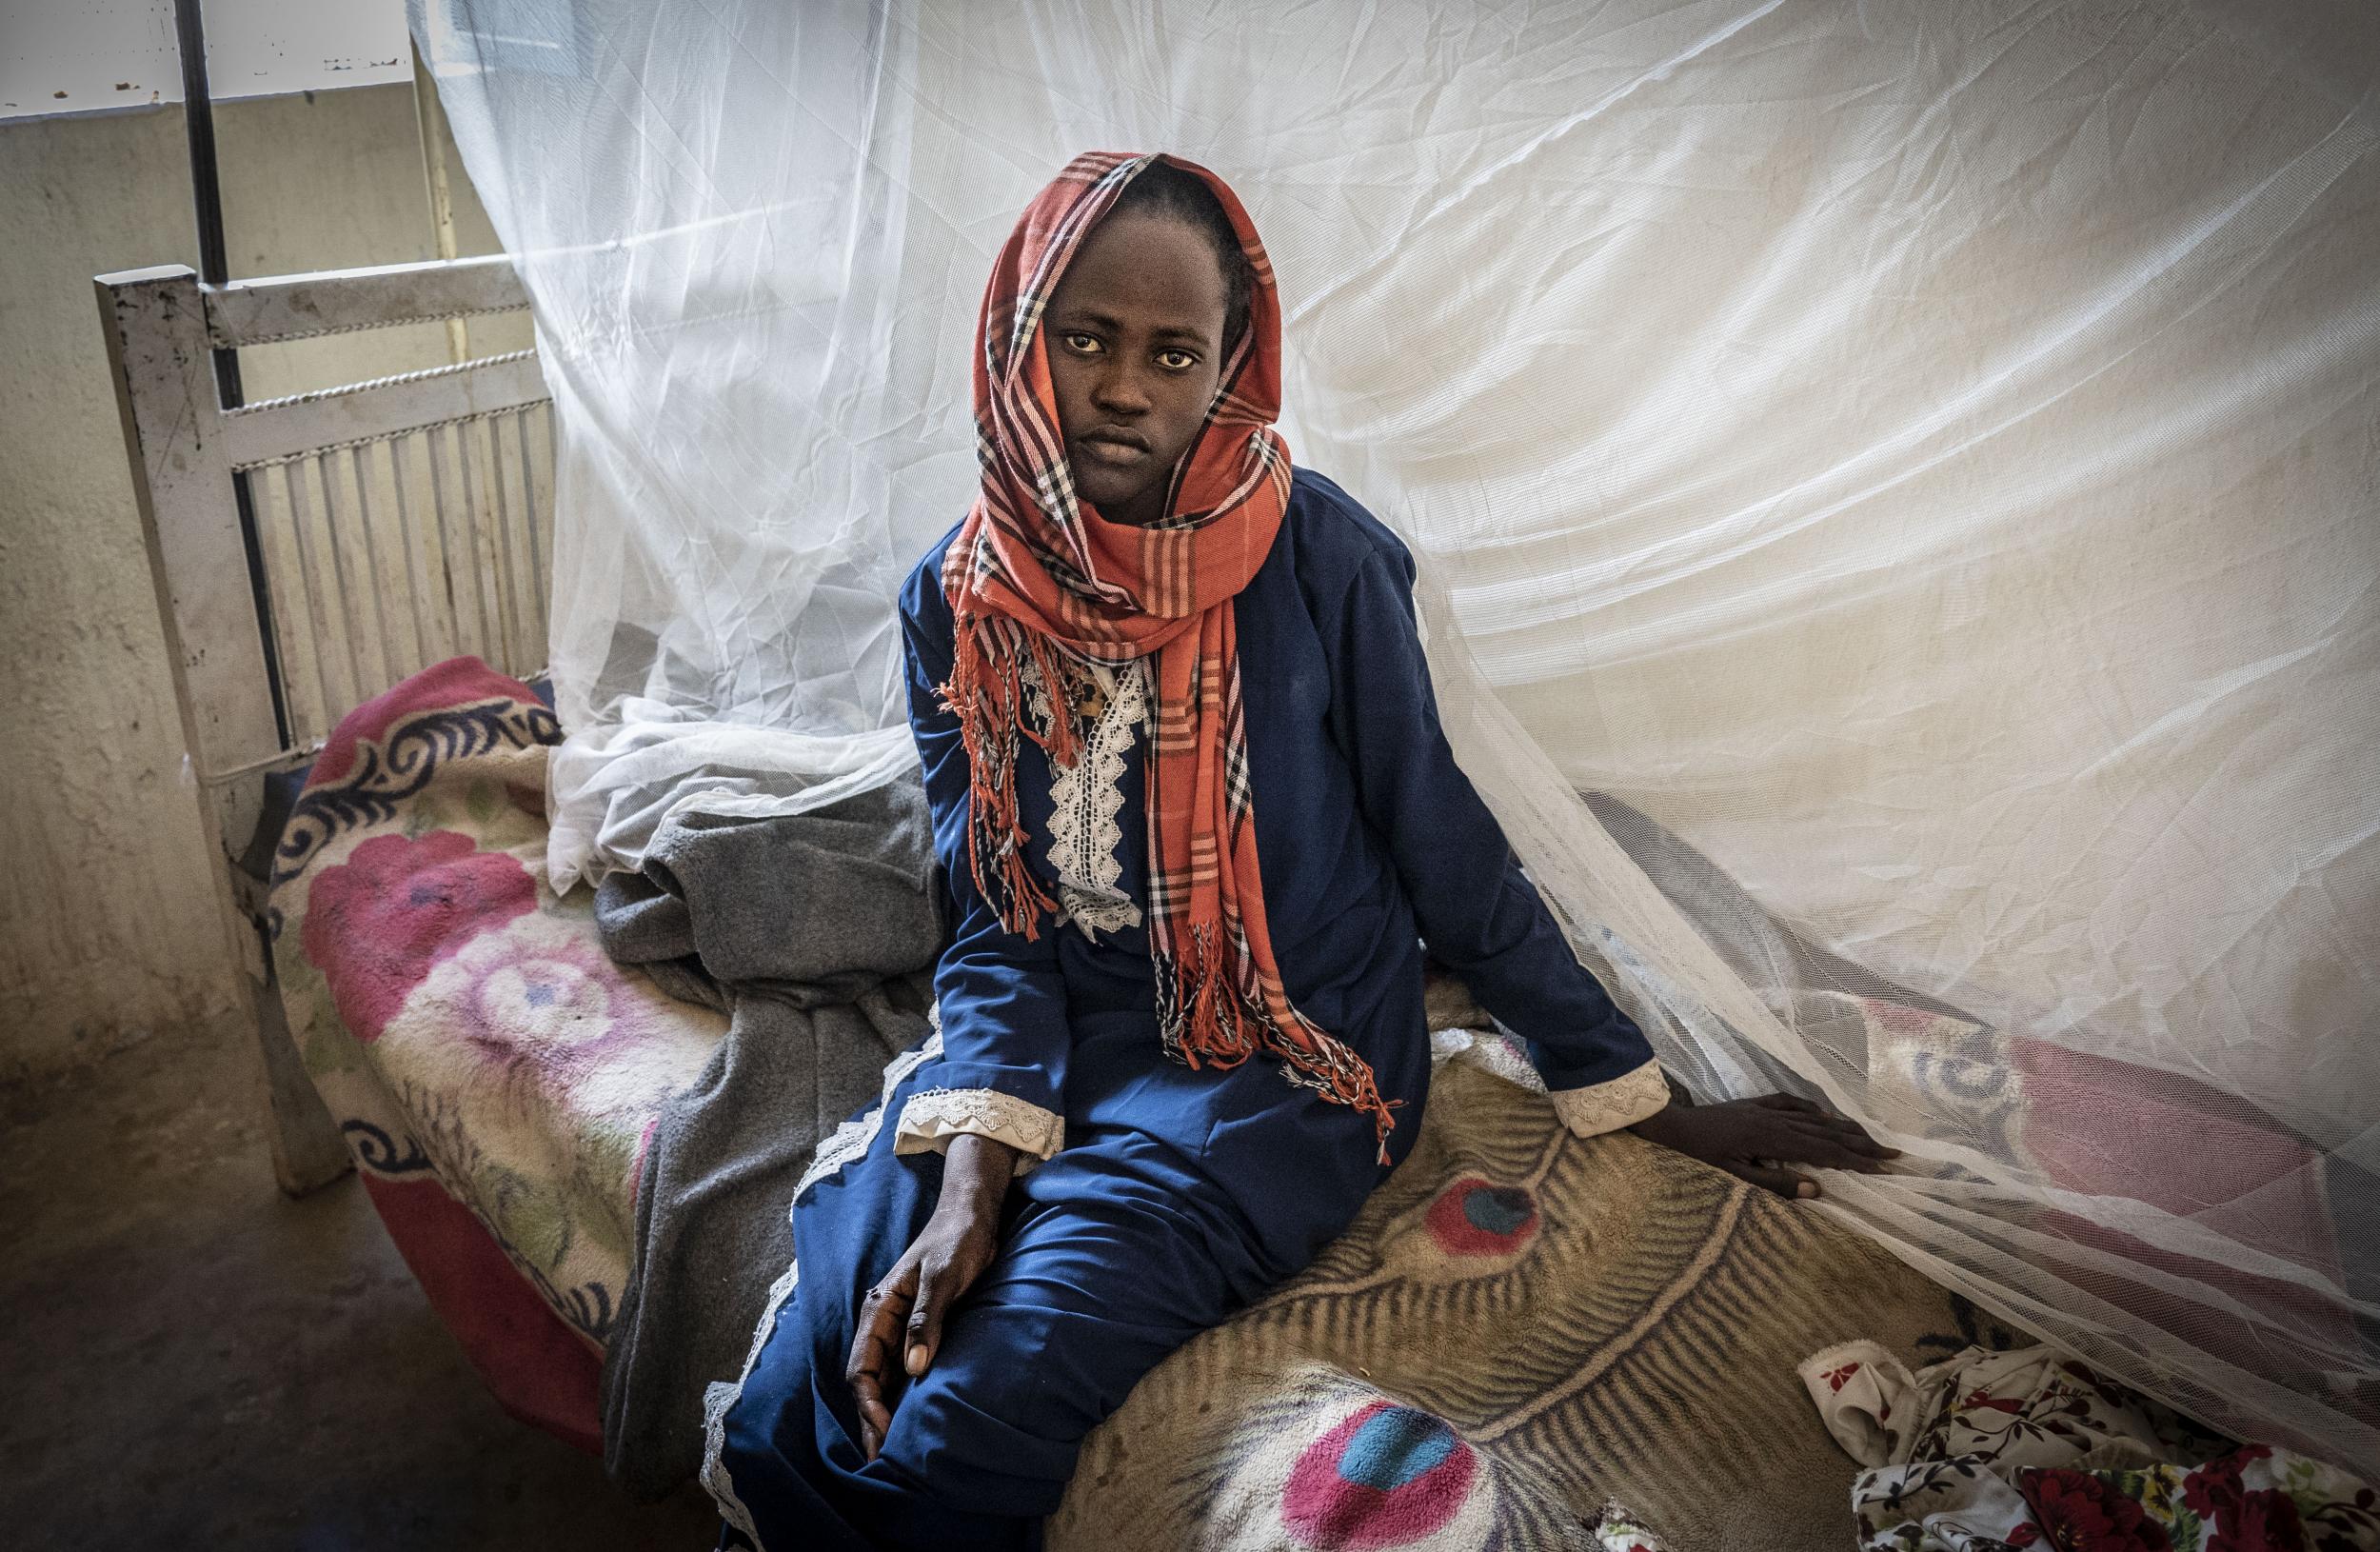 Akram, 14, is treated for malaria in Zamzam camp amid an ‘unprecedented’ outbreak of the disease in north Darfur